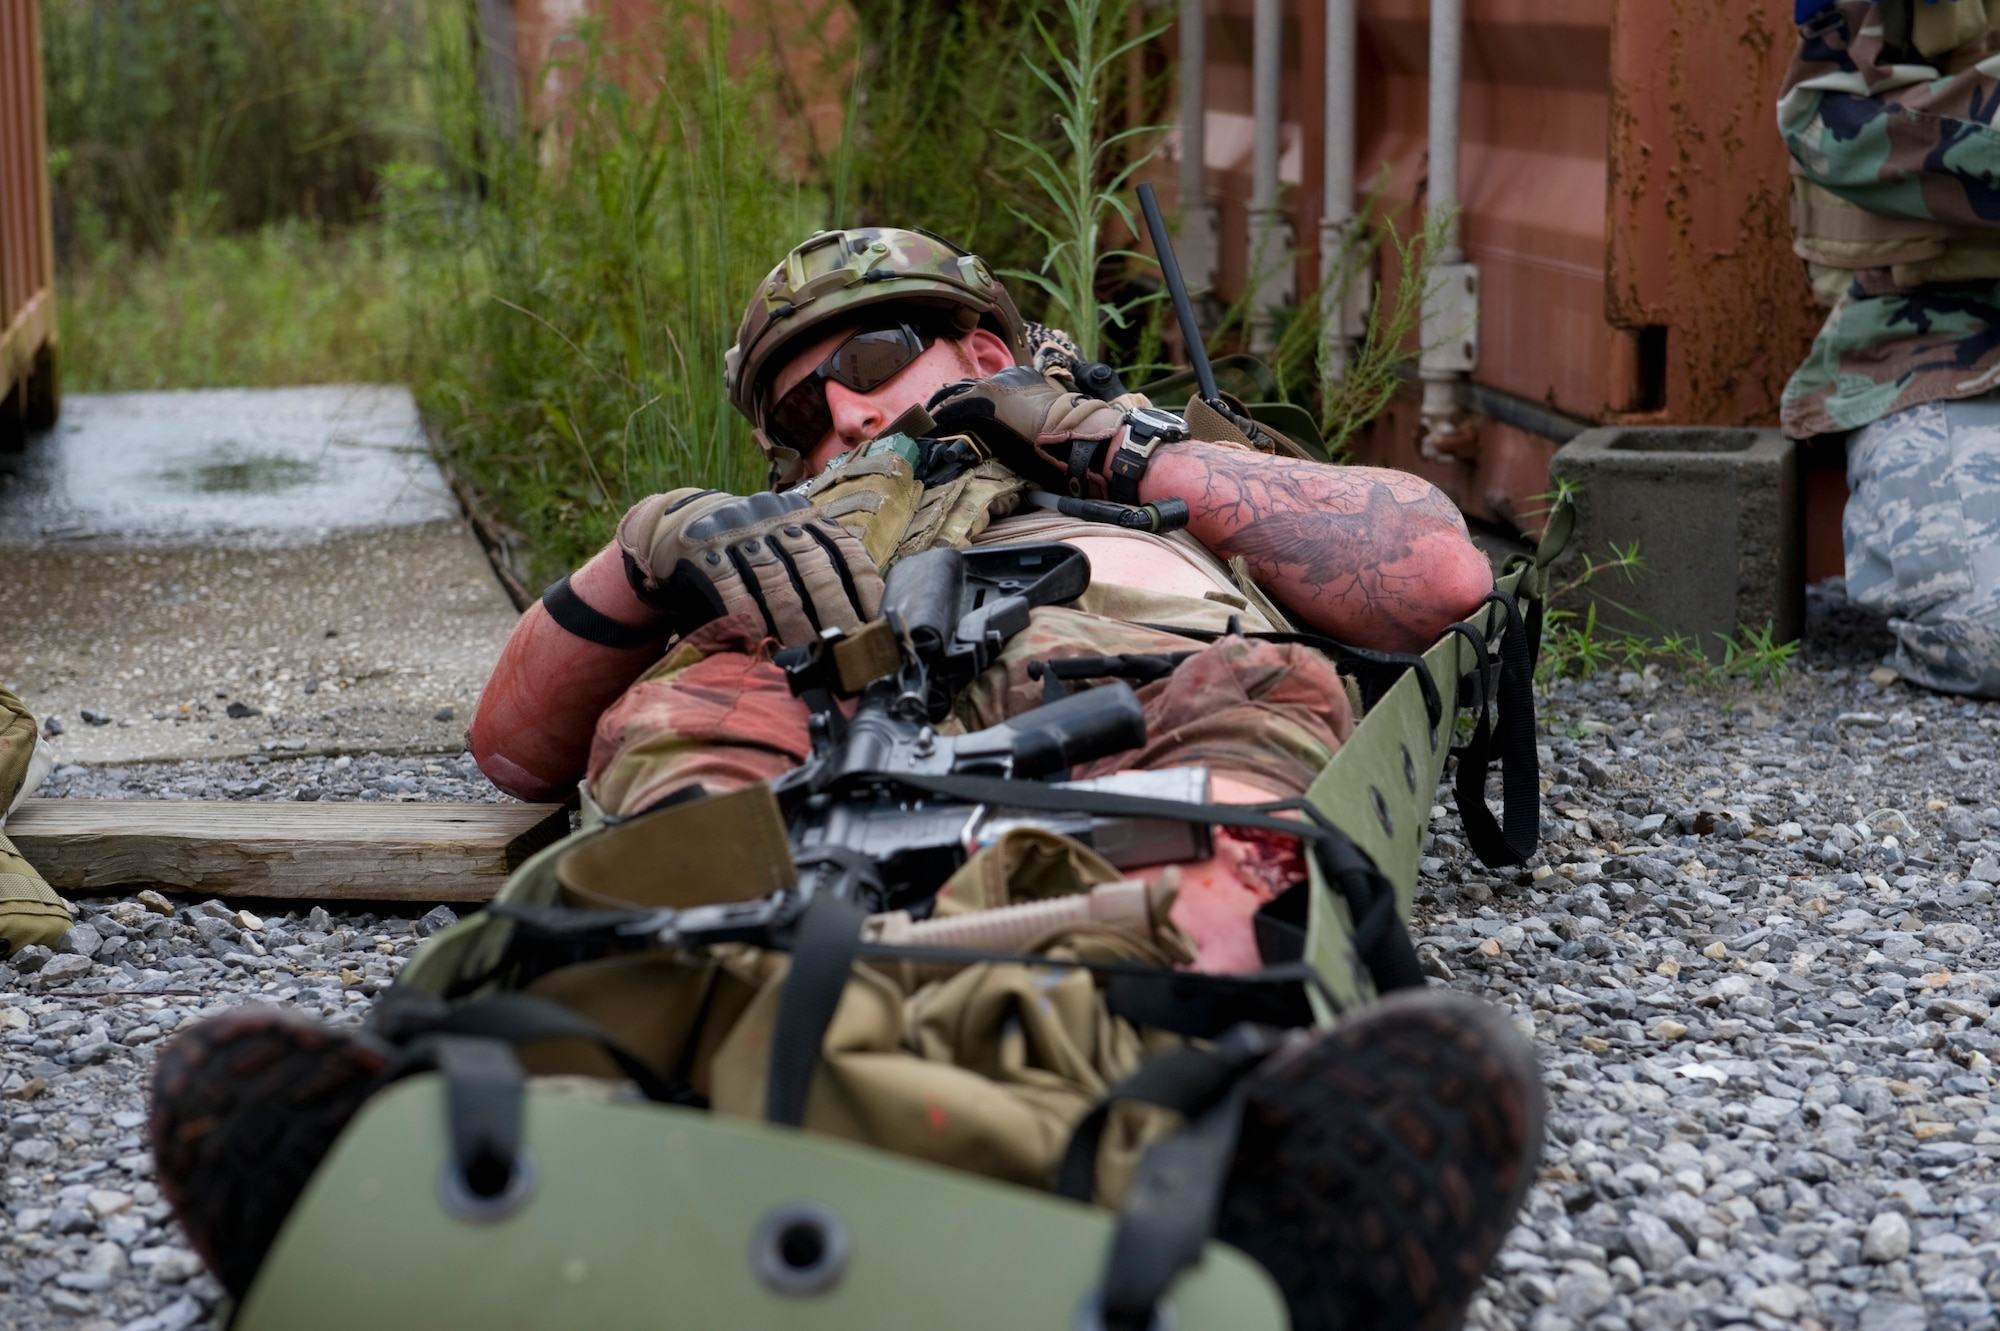 A U.S. Air Force pararescueman plays a casualty during a training exercise on Eglin Range, Fla., Aug. 21, 2012. The pararescueman was portraying a casualty killed in action during a training exercise.(U.S. Air Force Photo/ Staff Sgt. John Bainter)